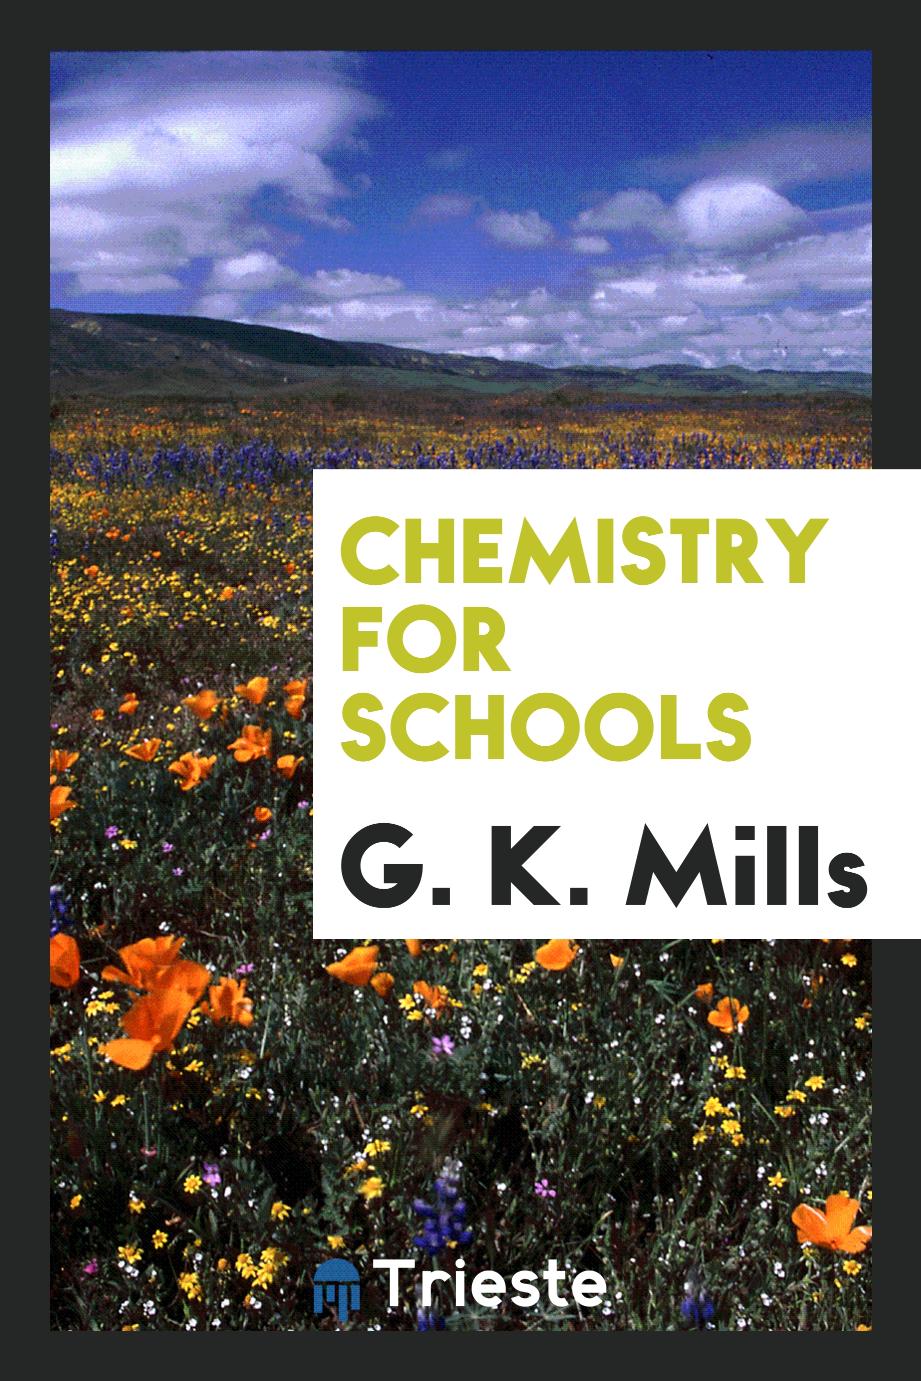 Chemistry for schools